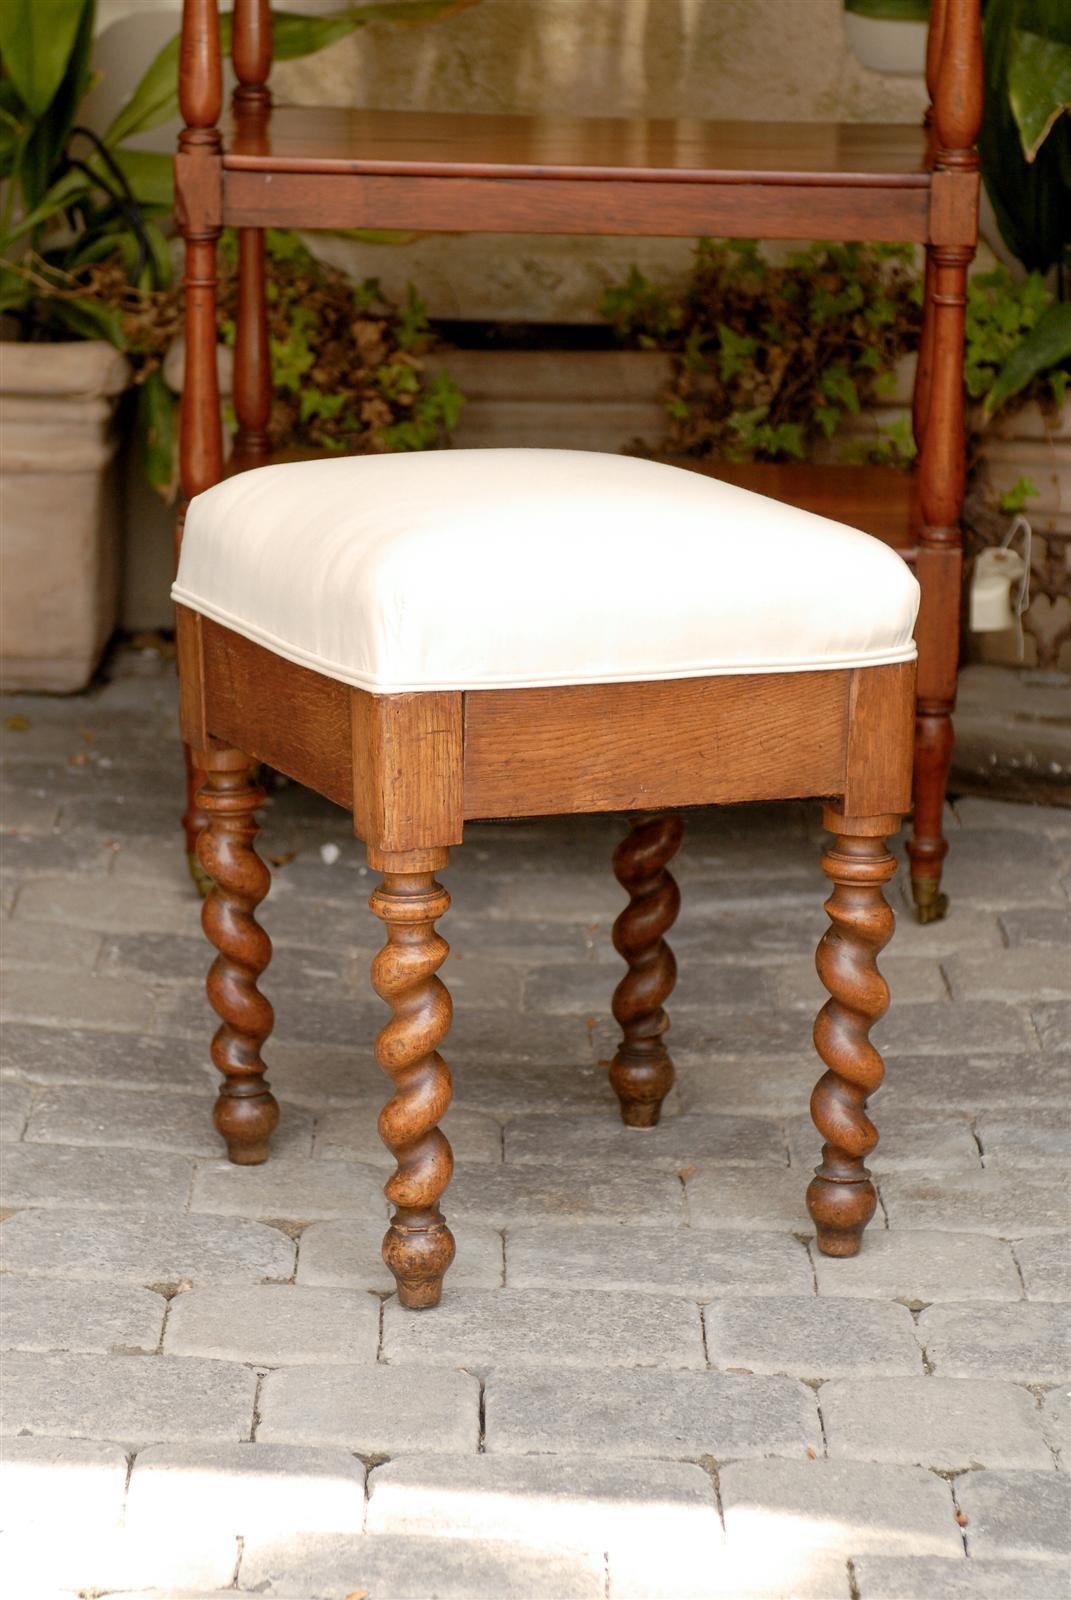 A French barley twist leg stool from the late 19th century. This French stool features four light brown barley twist legs supporting a simple skirt and a high cushion. The Barley twist style, while very popular in 19th century Europe actually